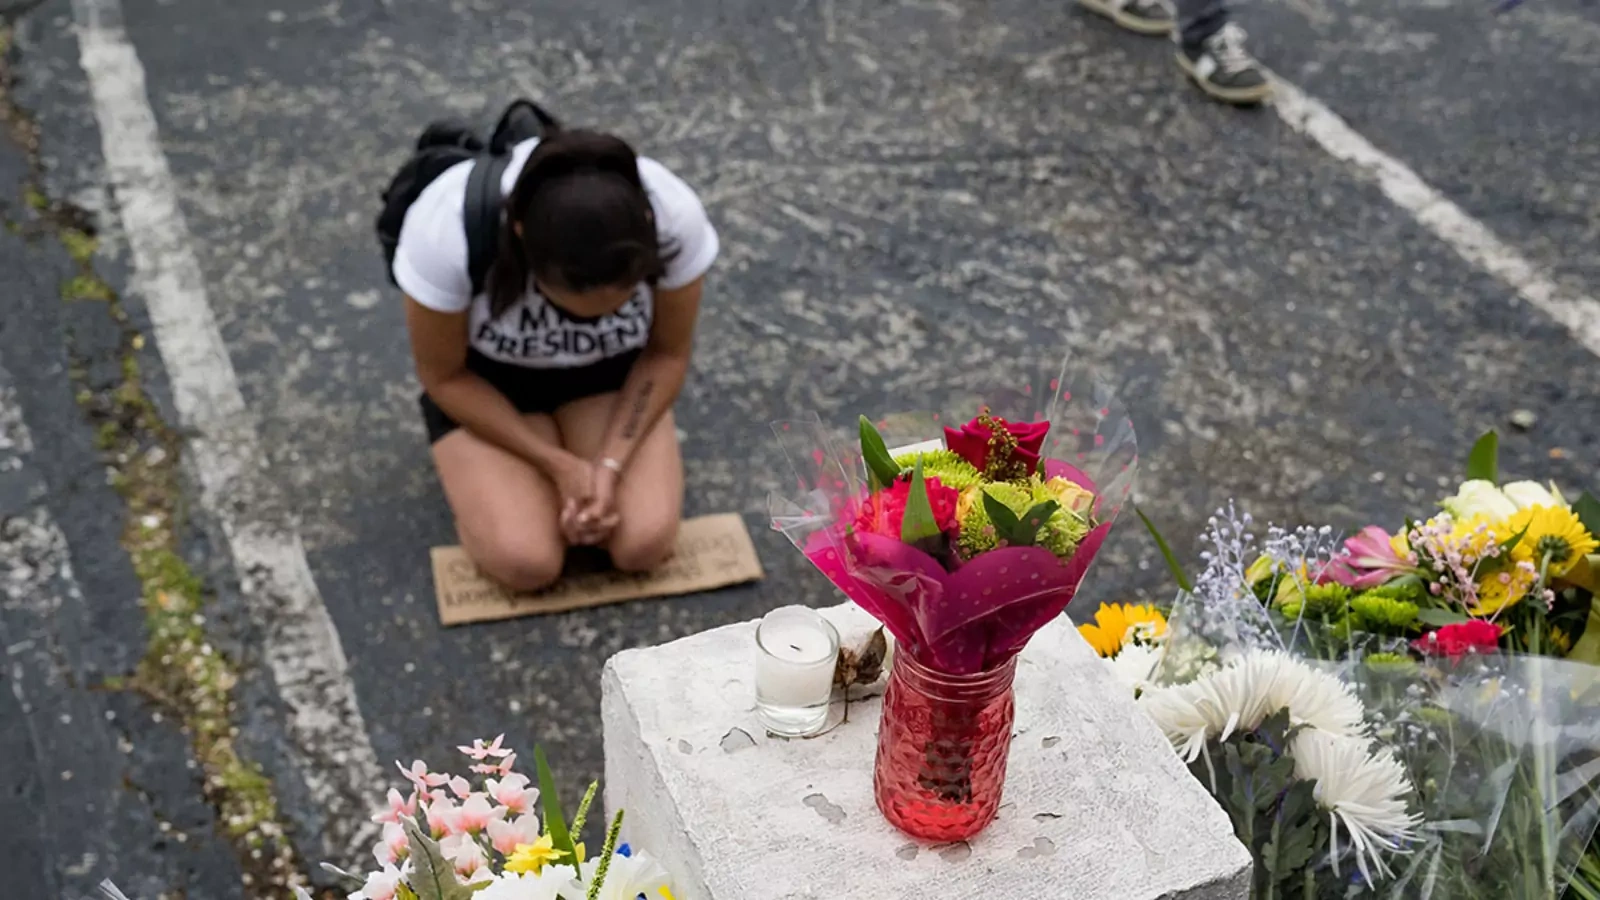  A demonstrator protesting violence against women and Asians kneels following the murder of three women in Atlanta in March 2021.